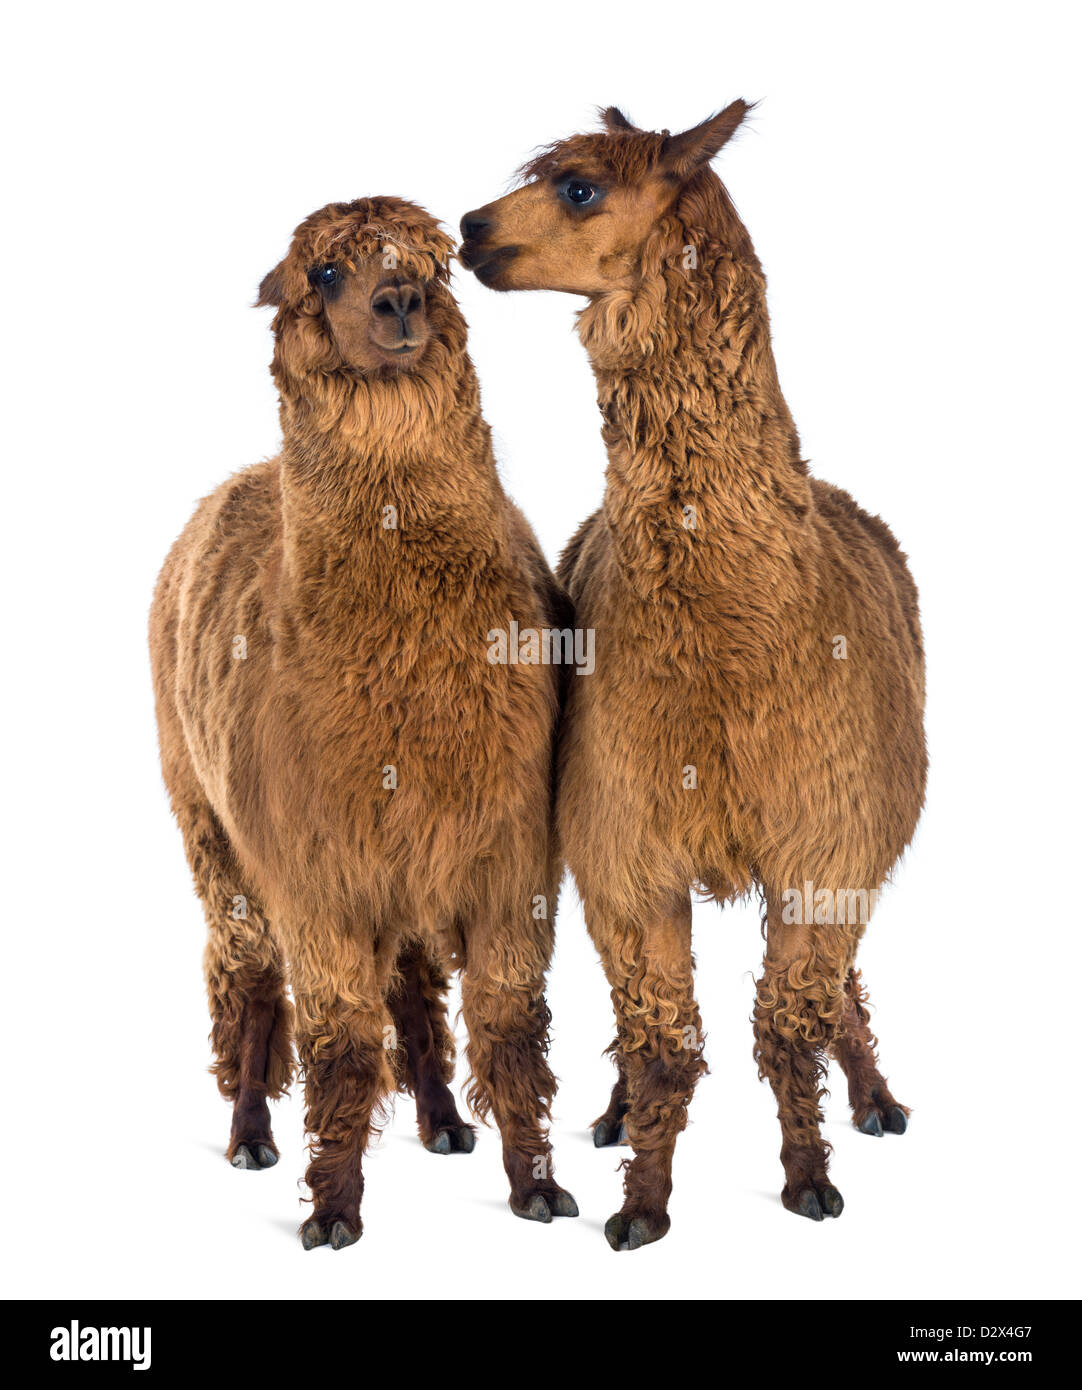 Alpaca, Vicugna pacos, whispering at another Alpaca's ear against white background Stock Photo